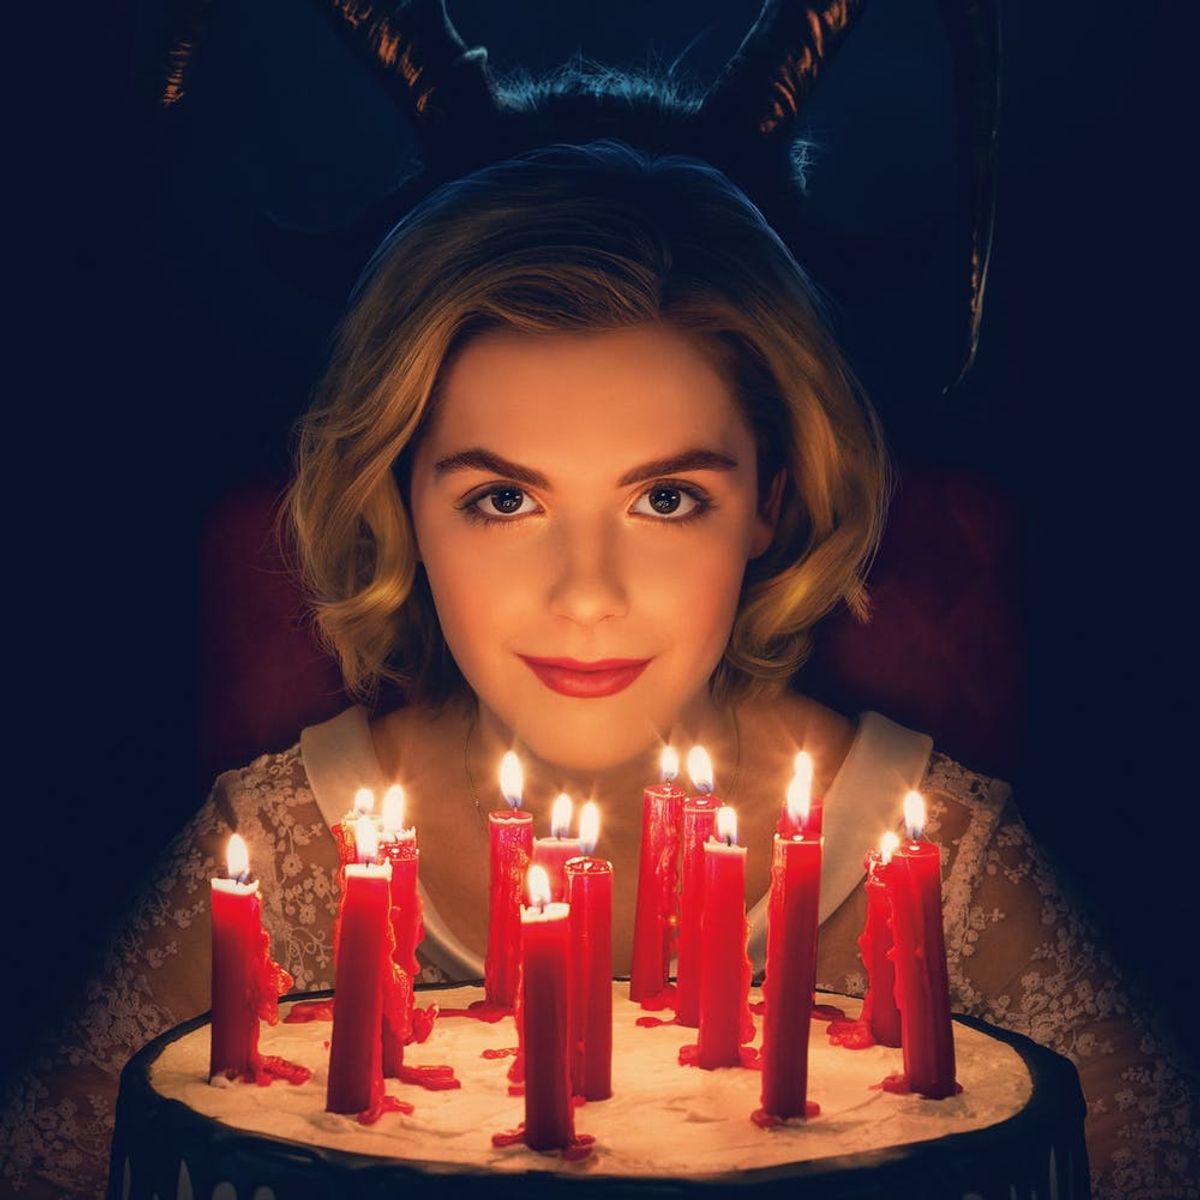 This New ‘Chilling Adventures of Sabrina’ Trailer Will Leave You Spooked and Wanting More